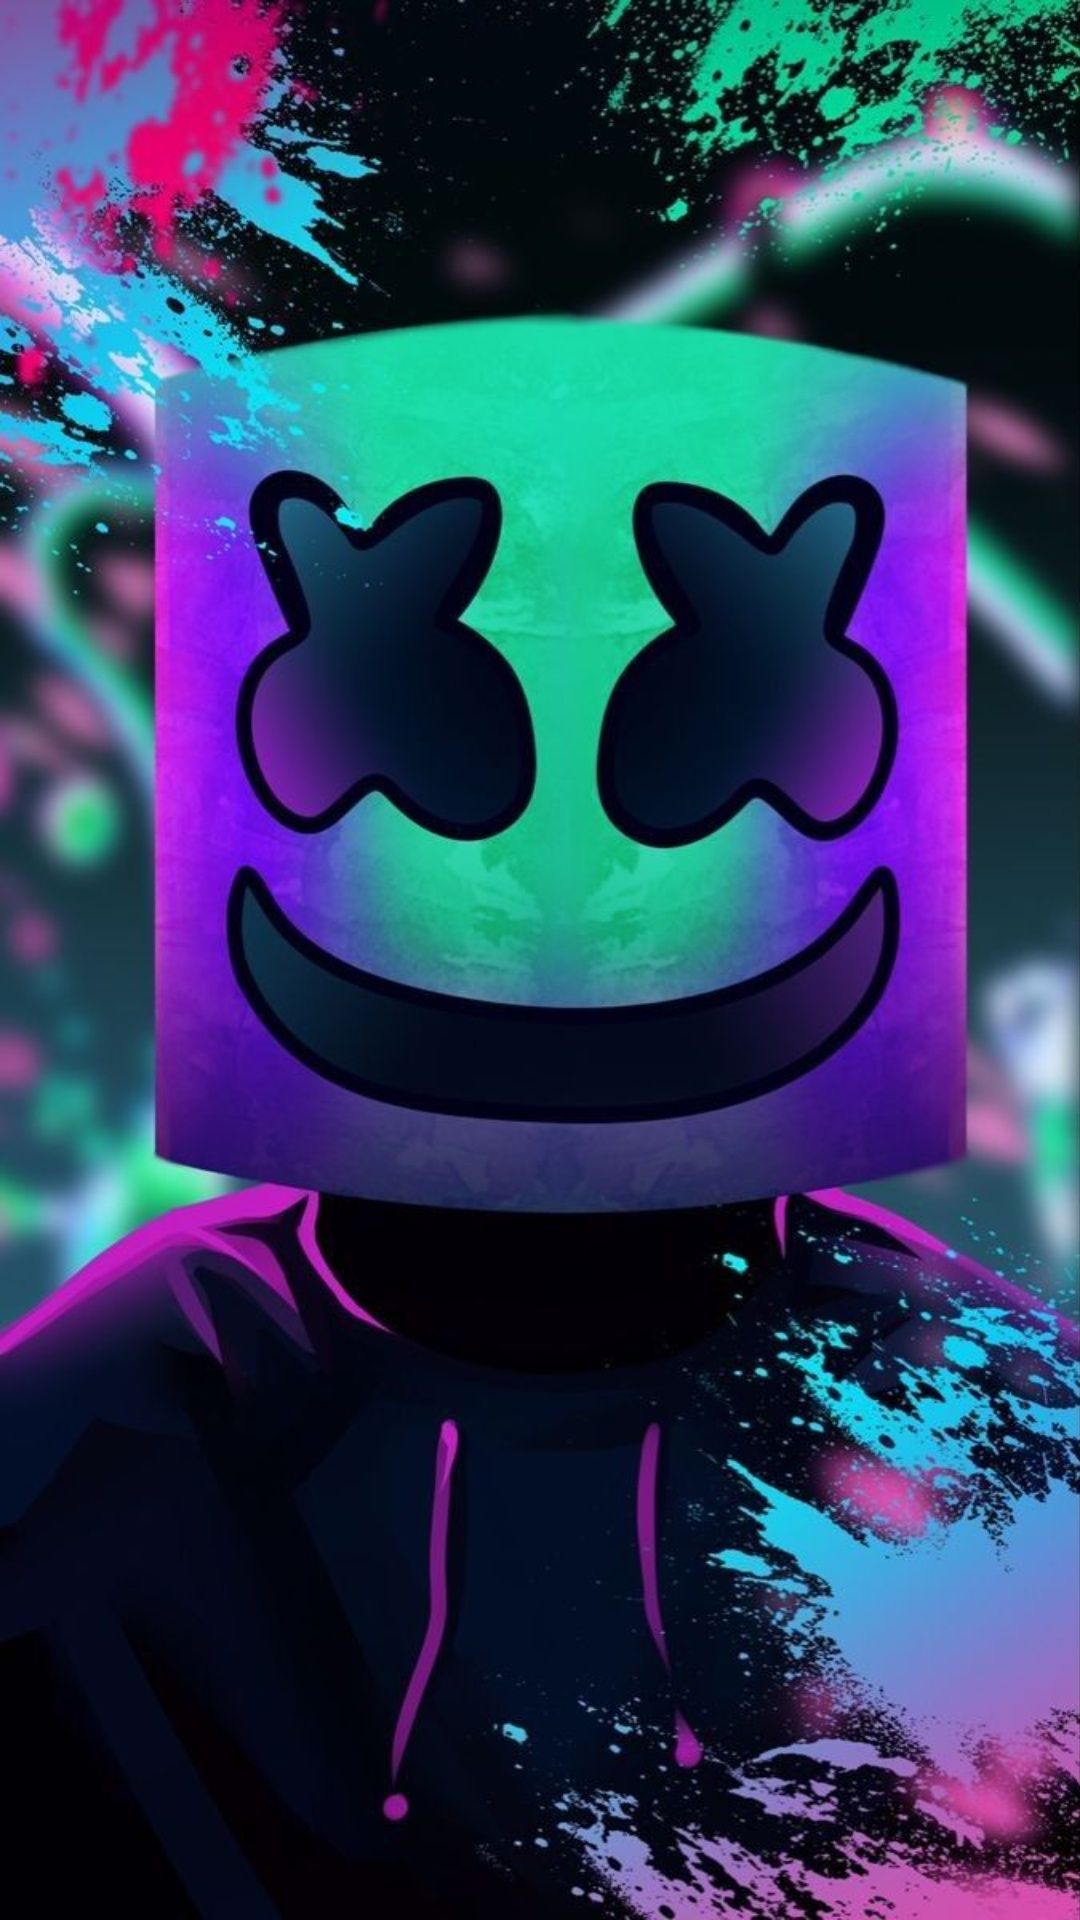 Marshmello Wallpaper iPhone with high-resolution 1080x1920 pixel. You can use this wallpaper for your iPhone 5, 6, 7, 8, X, XS, XR backgrounds, Mobile Screensaver, or iPad Lock Screen - Marshmello